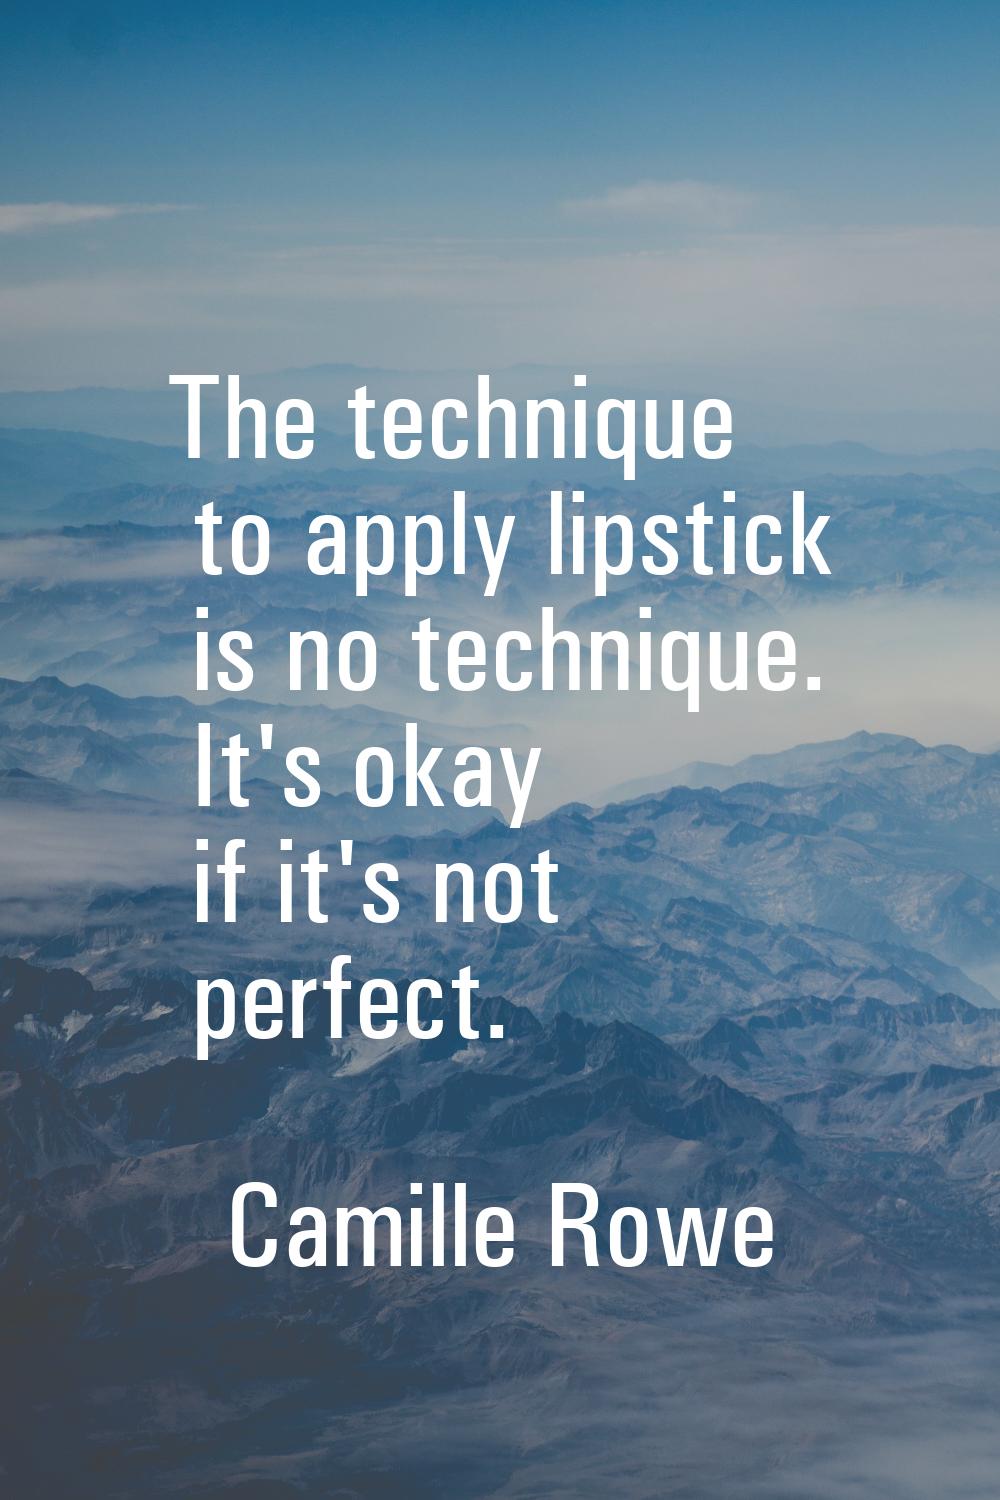 The technique to apply lipstick is no technique. It's okay if it's not perfect.